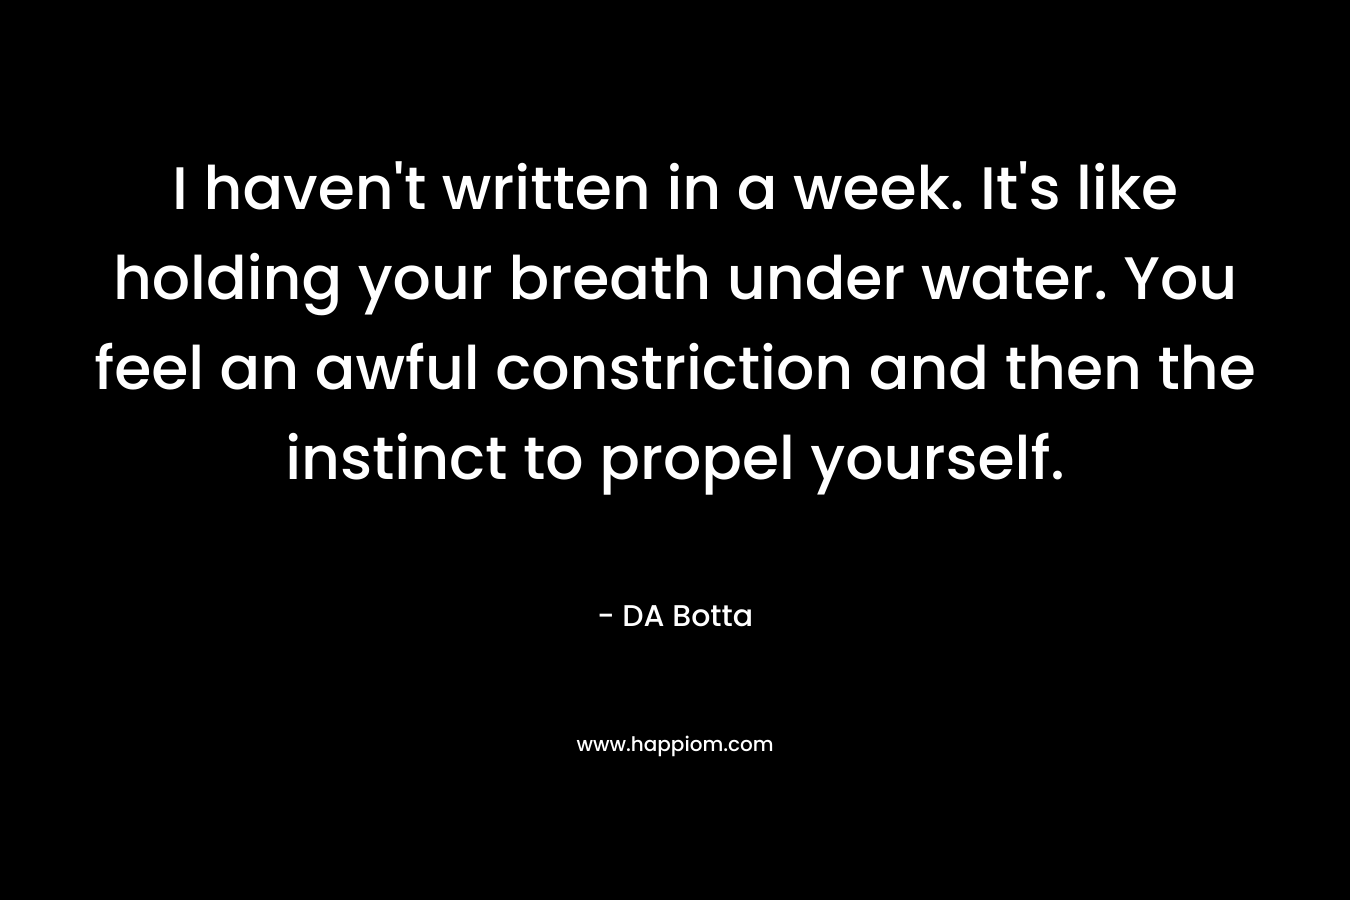 I haven’t written in a week. It’s like holding your breath under water. You feel an awful constriction and then the instinct to propel yourself. – DA Botta